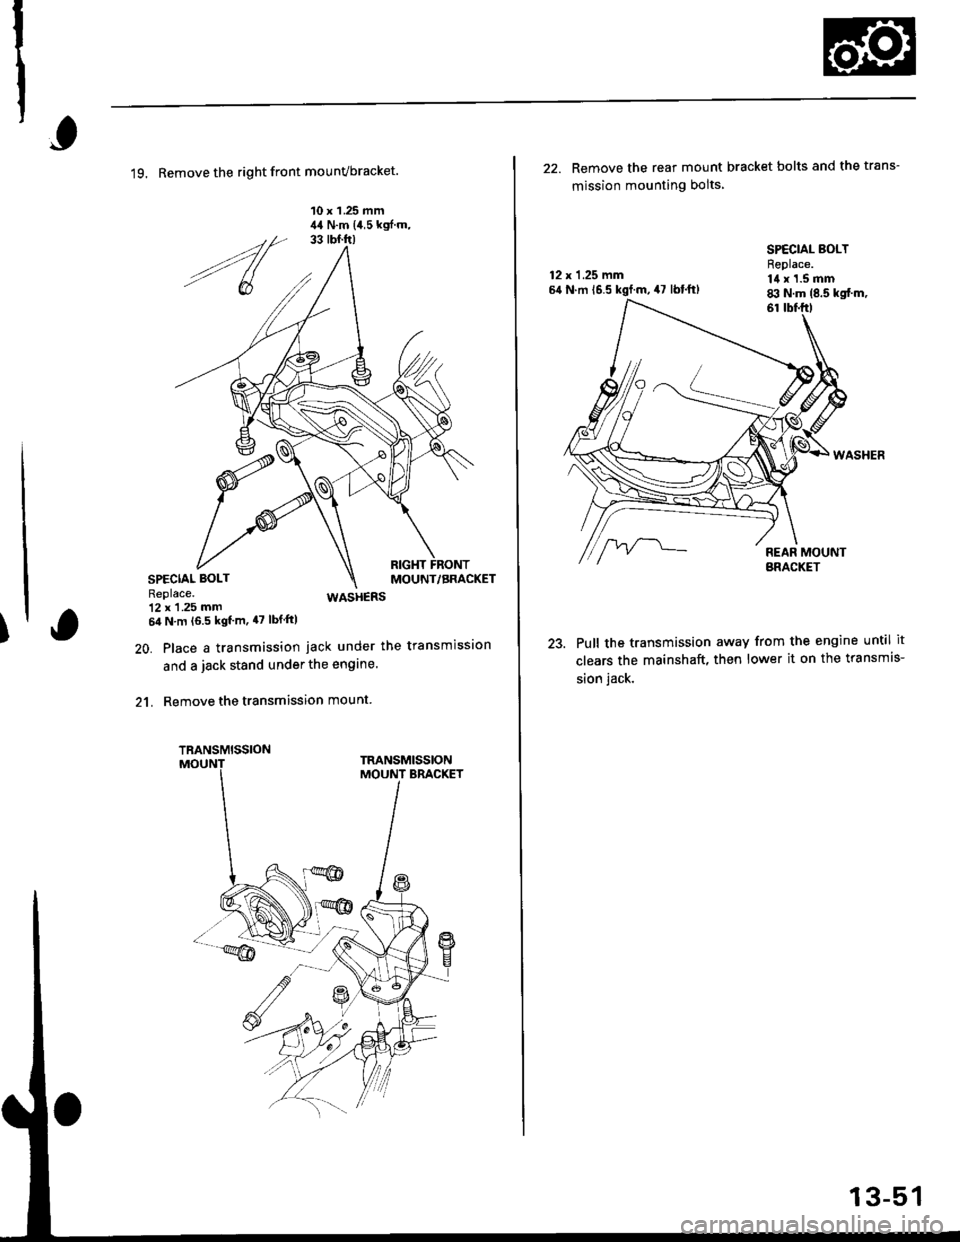 HONDA CIVIC 1999 6.G Workshop Manual )
19. Remove the right front mounvbracket.
10 x 1 .25 mm,14 N.m {4,5 kgf.m,
WASHERS
20. Place a transmission jack under the transmission
and a jack stand under the engine.
21. Remove the transmission 